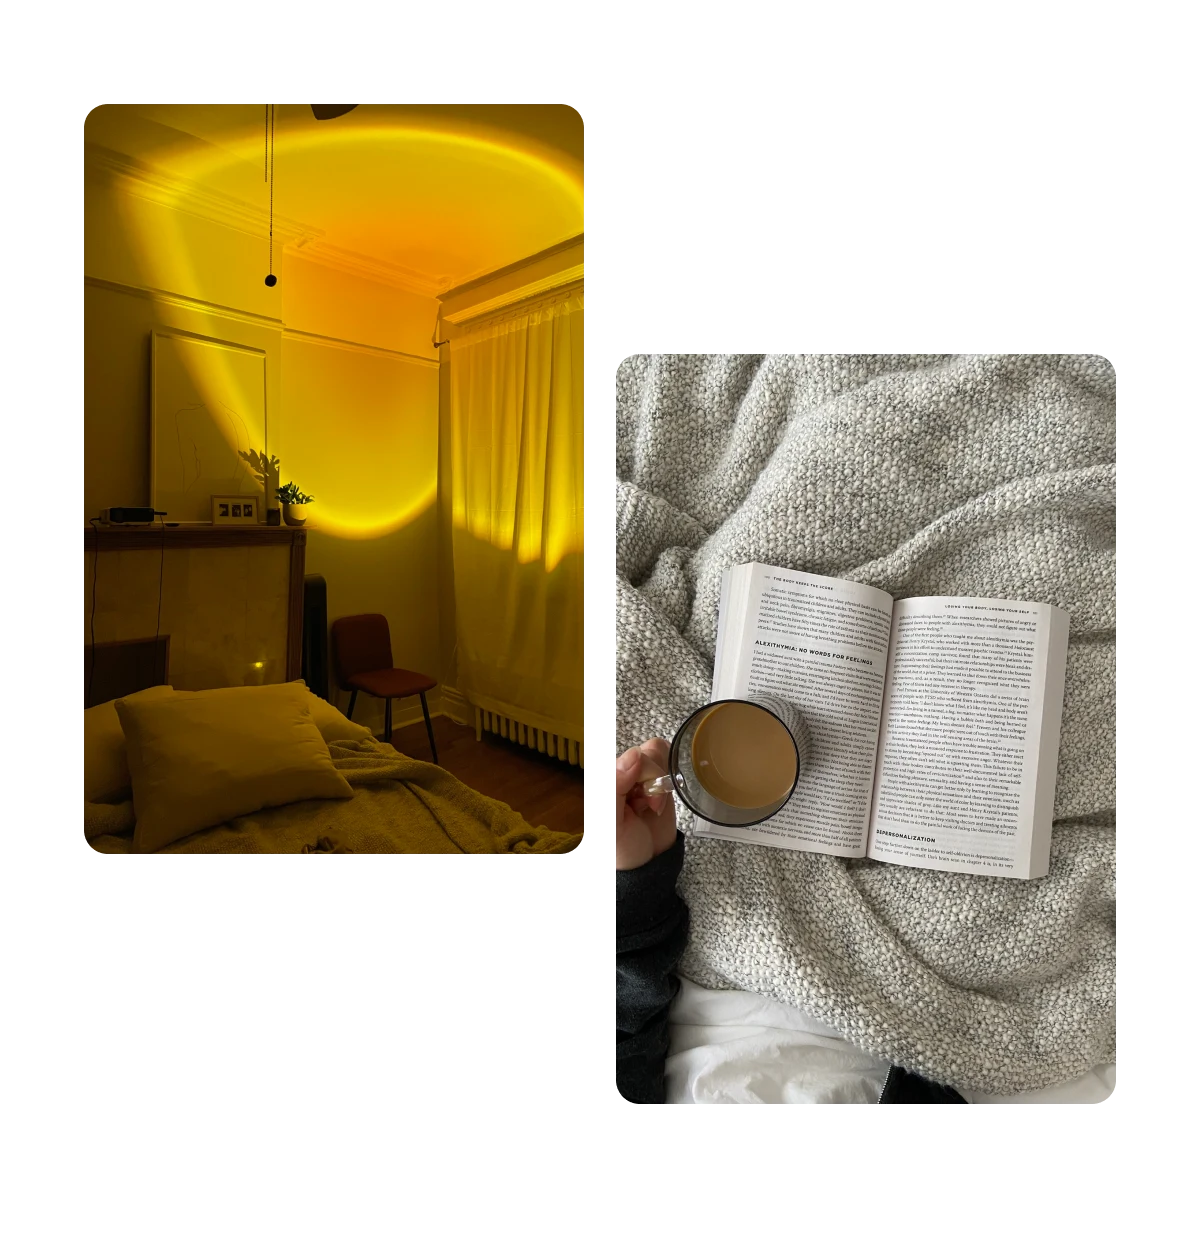 Two pins, bedroom with sunset lamp, book and coffee in bed